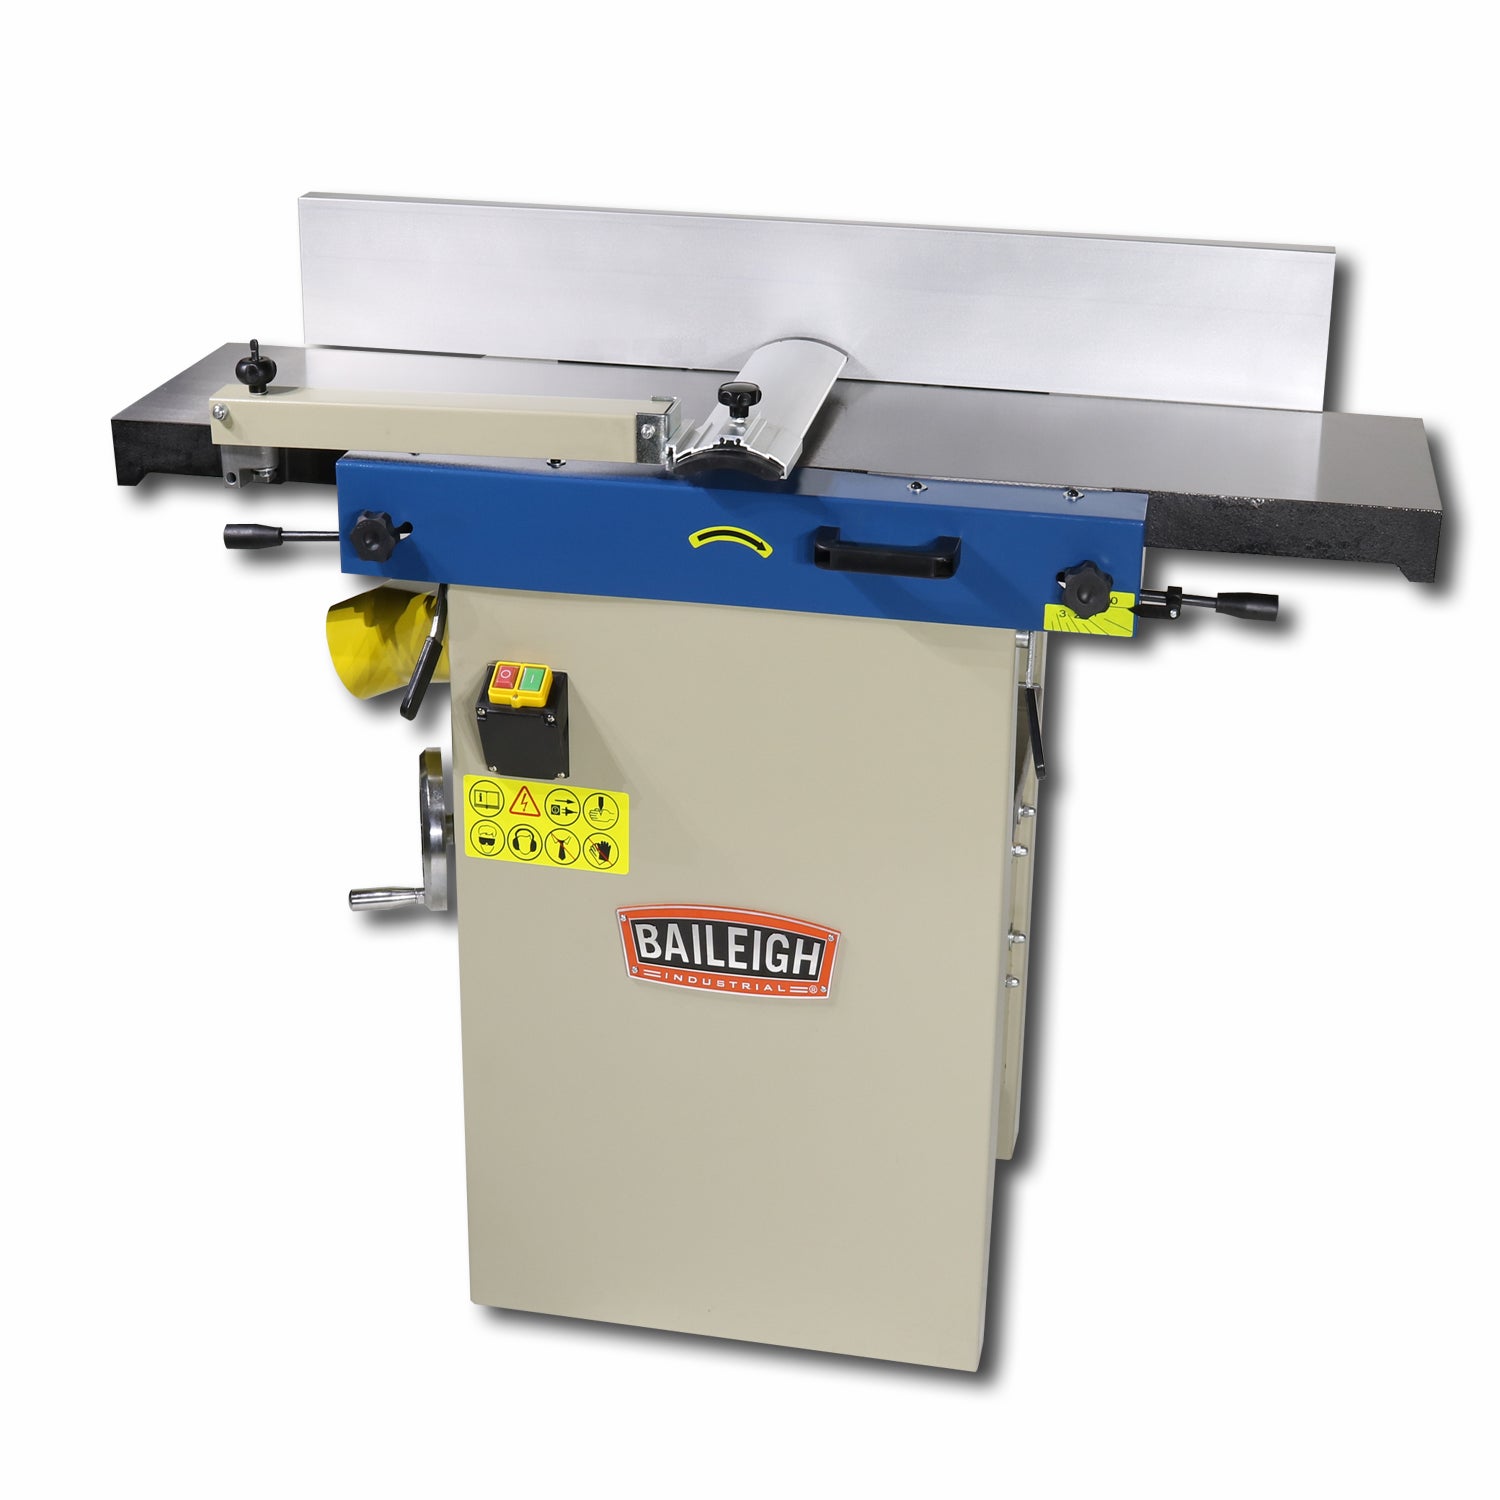 Baileigh JP-1250-1.0 220V 1 Phase 3hp 12" Industrial Jointer/Planer w/ 5 Groove Helical Insert Cutter